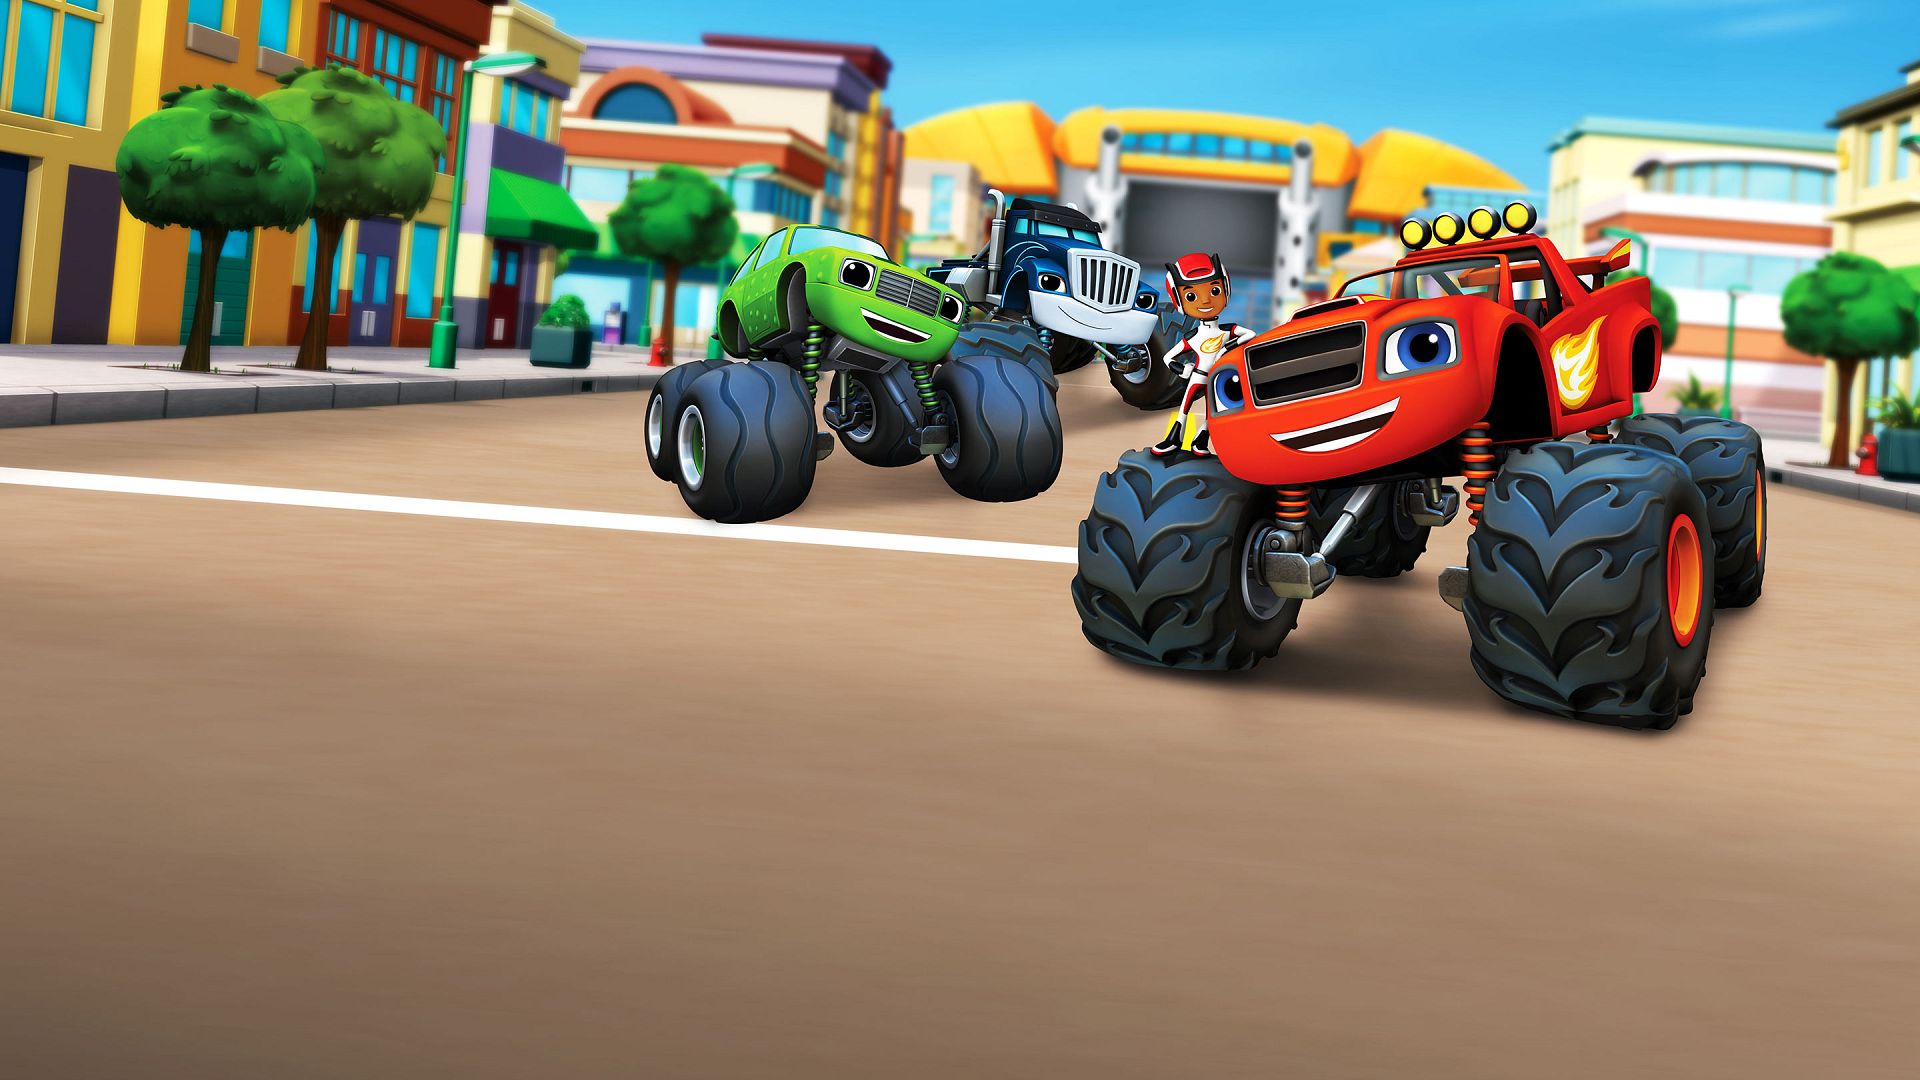 Blaze and the Monster Machines - Nickelodeon - Watch on Paramount Plus